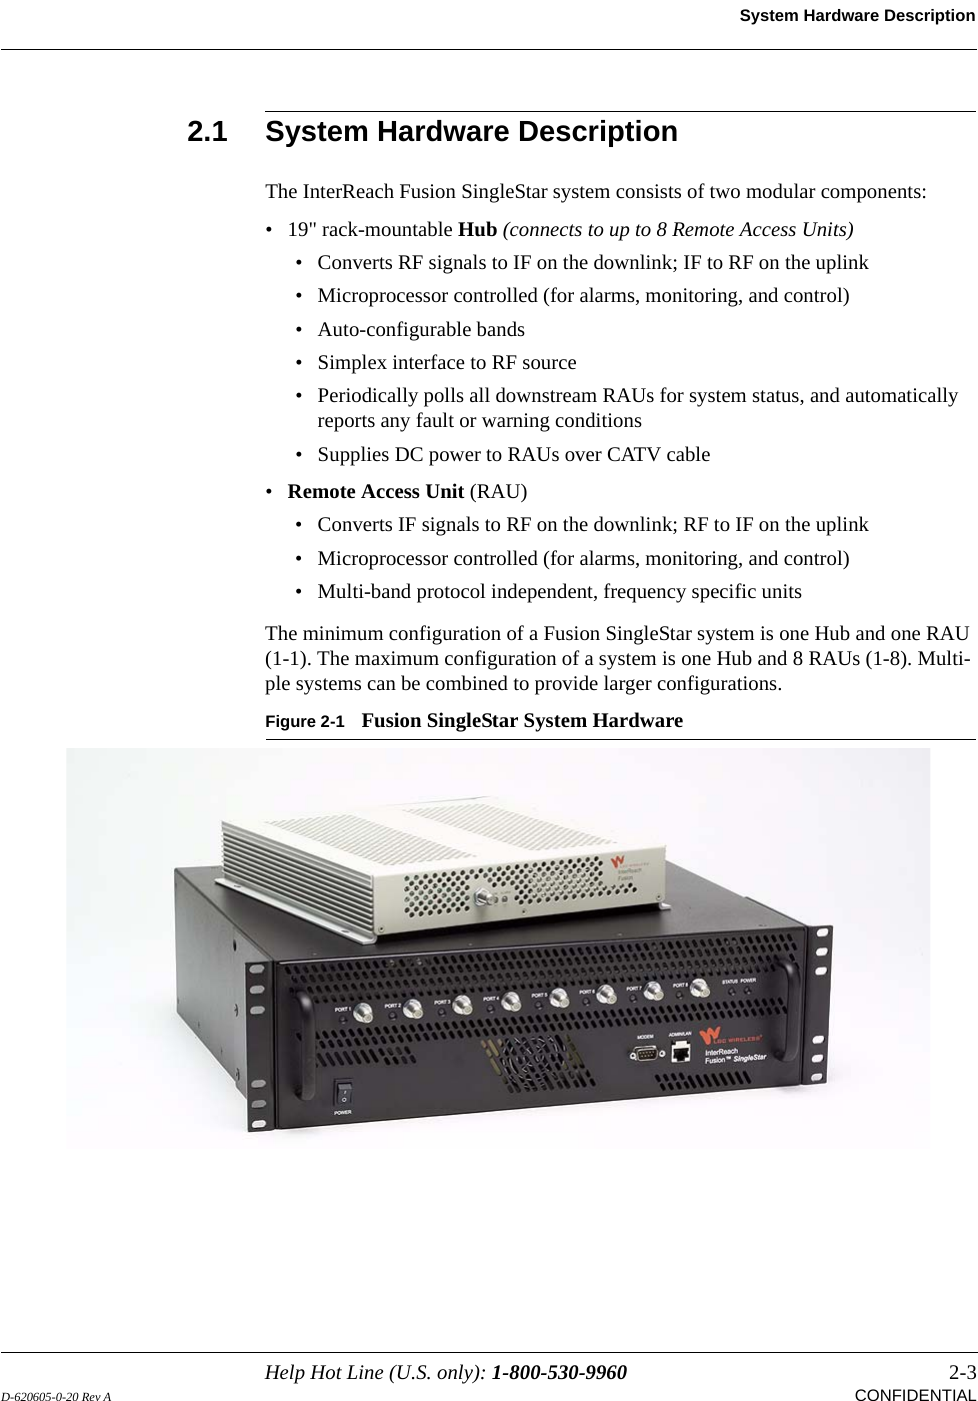 Help Hot Line (U.S. only): 1-800-530-9960 2-3D-620605-0-20 Rev A CONFIDENTIALSystem Hardware Description2.1 System Hardware DescriptionThe InterReach Fusion SingleStar system consists of two modular components:• 19&quot; rack-mountable Hub (connects to up to 8 Remote Access Units)• Converts RF signals to IF on the downlink; IF to RF on the uplink• Microprocessor controlled (for alarms, monitoring, and control)• Auto-configurable bands• Simplex interface to RF source• Periodically polls all downstream RAUs for system status, and automatically reports any fault or warning conditions• Supplies DC power to RAUs over CATV cable•Remote Access Unit (RAU)• Converts IF signals to RF on the downlink; RF to IF on the uplink• Microprocessor controlled (for alarms, monitoring, and control)• Multi-band protocol independent, frequency specific unitsThe minimum configuration of a Fusion SingleStar system is one Hub and one RAU (1-1). The maximum configuration of a system is one Hub and 8 RAUs (1-8). Multi-ple systems can be combined to provide larger configurations.Figure 2-1 Fusion SingleStar System Hardware